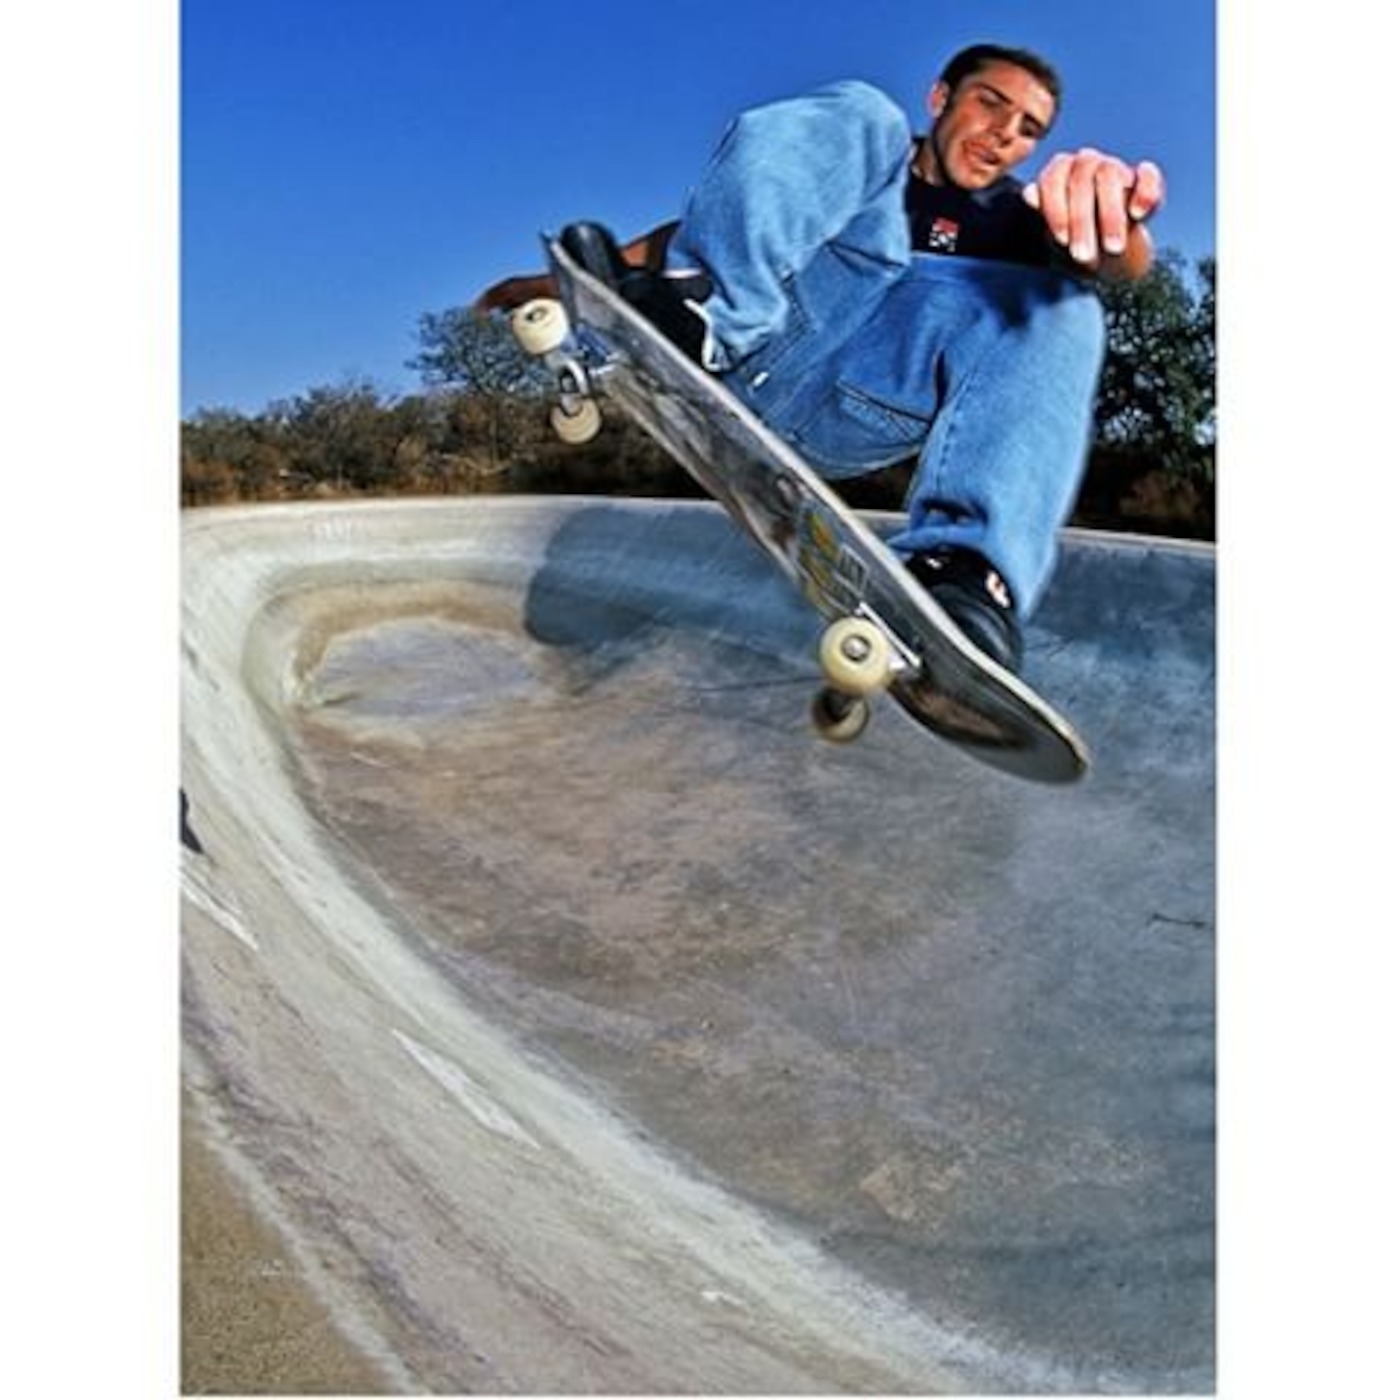 Episode 164: Dave Mayhew - ALL I NEED SKATE PODCAST